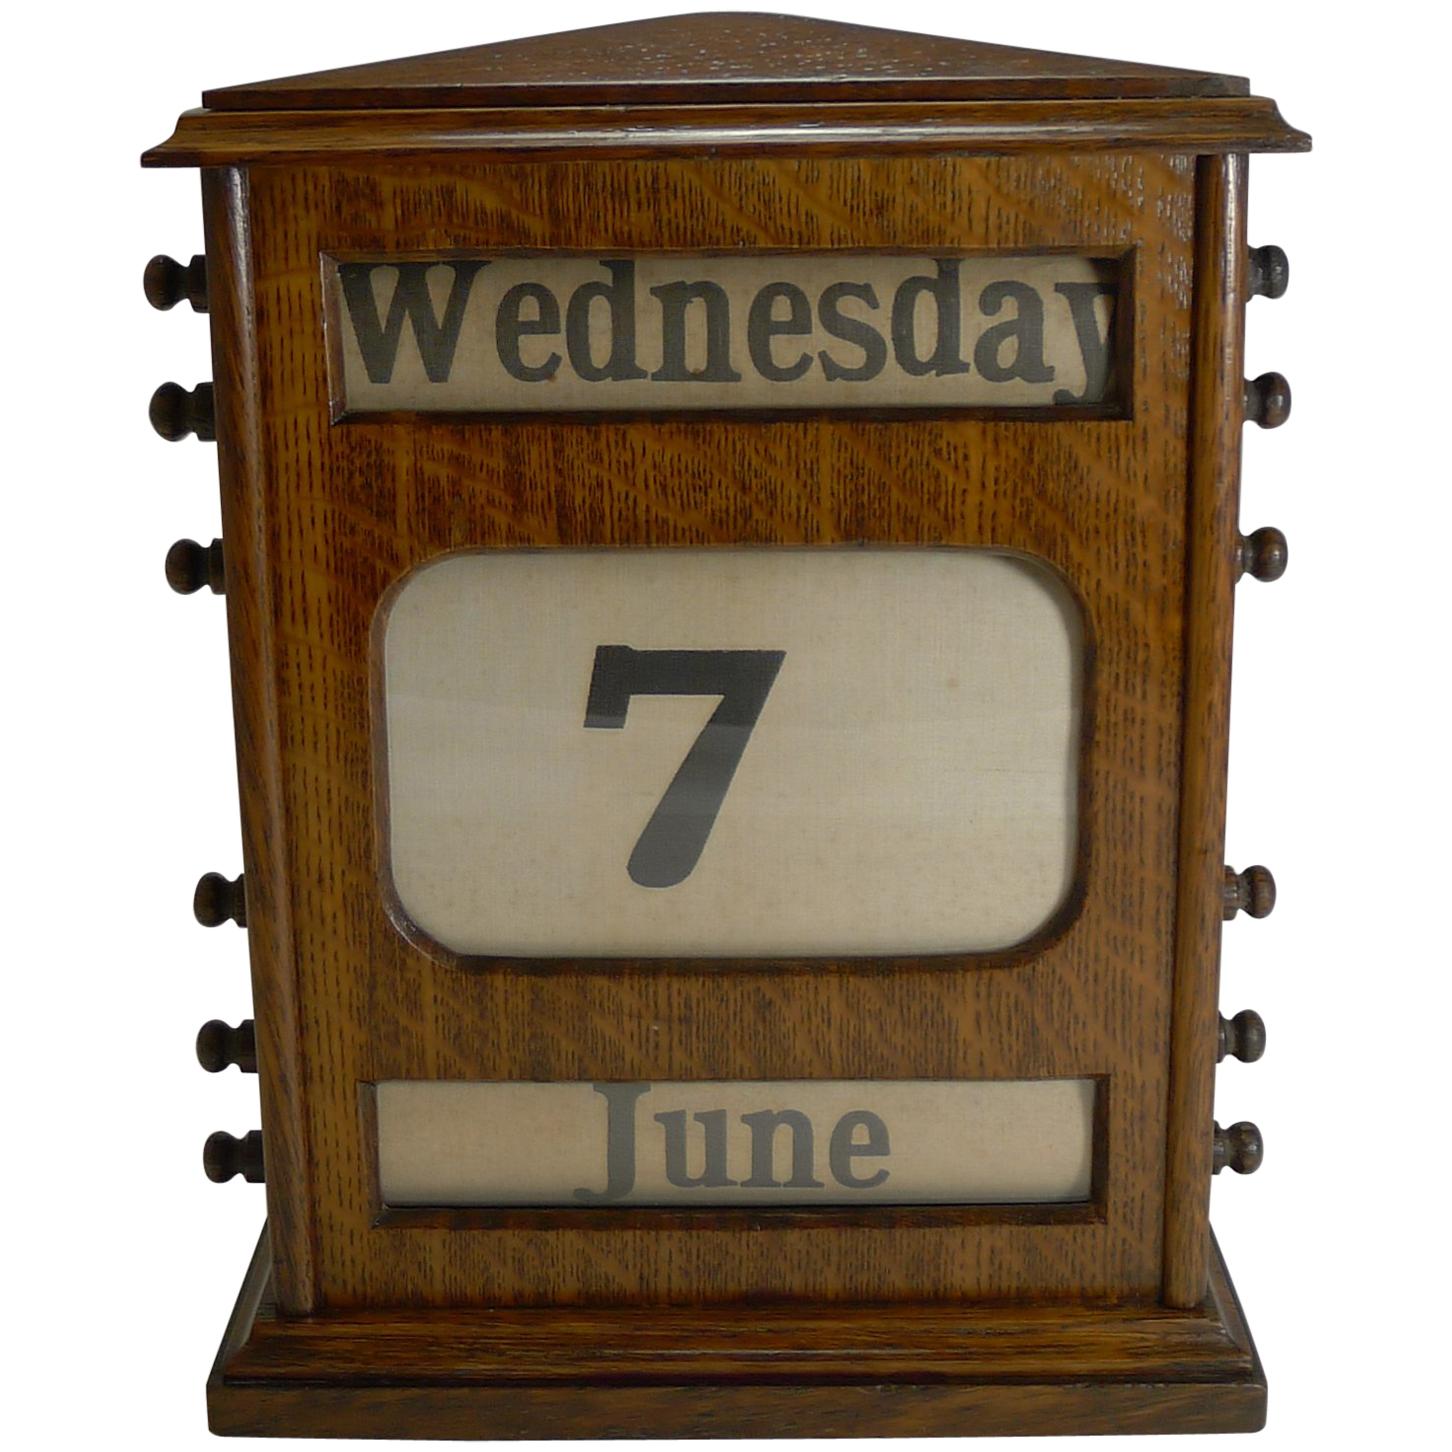 Perpetual Desk Calendar a stylish accessory .always know the day and date . 